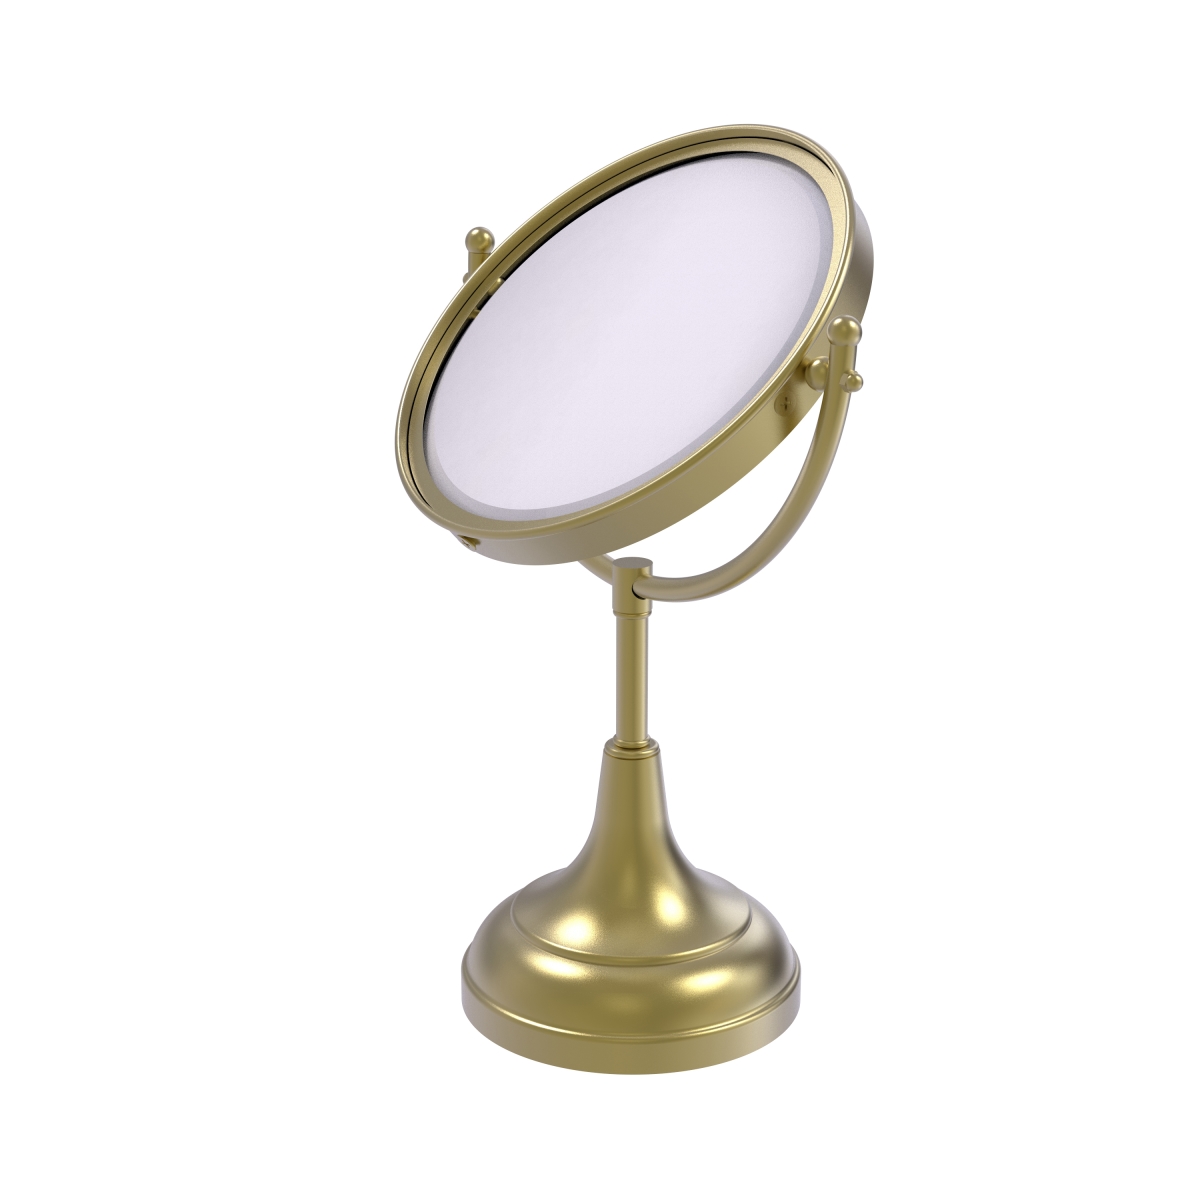 Dm-2-3x-sbr Smooth Ring Style 8 In. Vanity Top Make-up Mirror 3x Magnification, Satin Brass